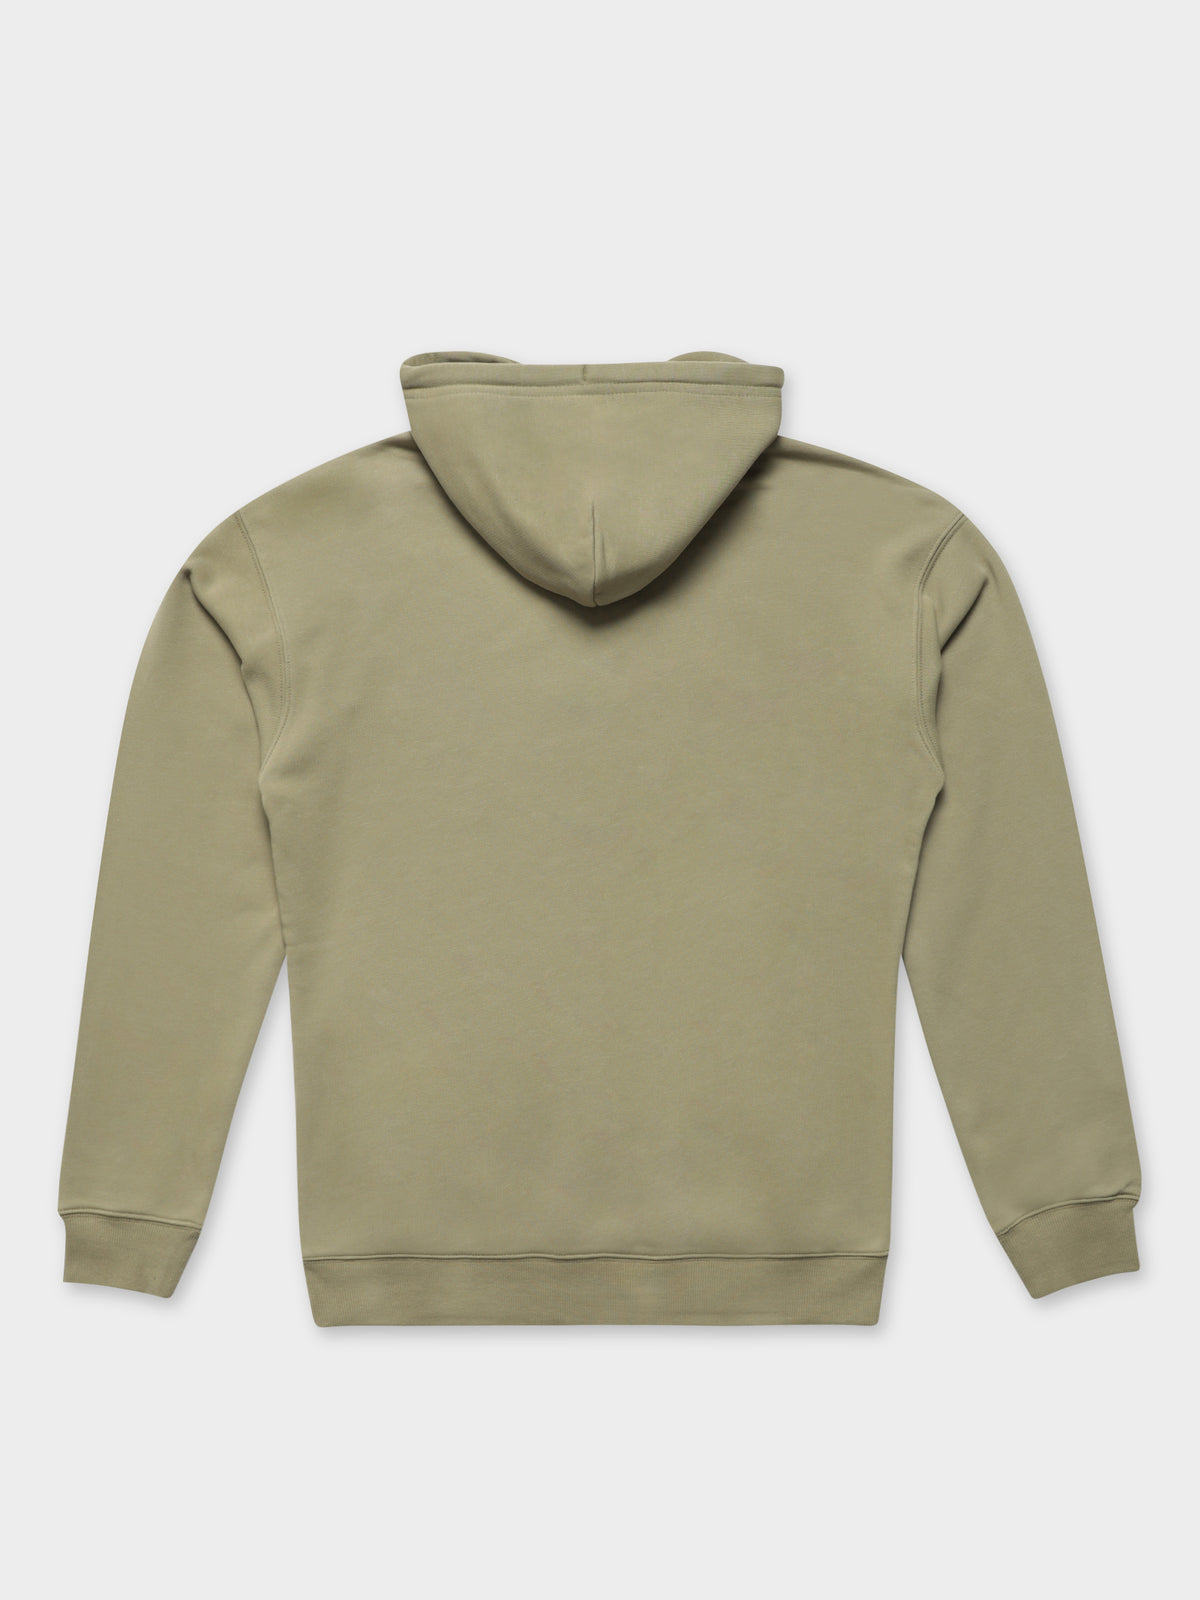 Double Team Hoodie in Olive Gray